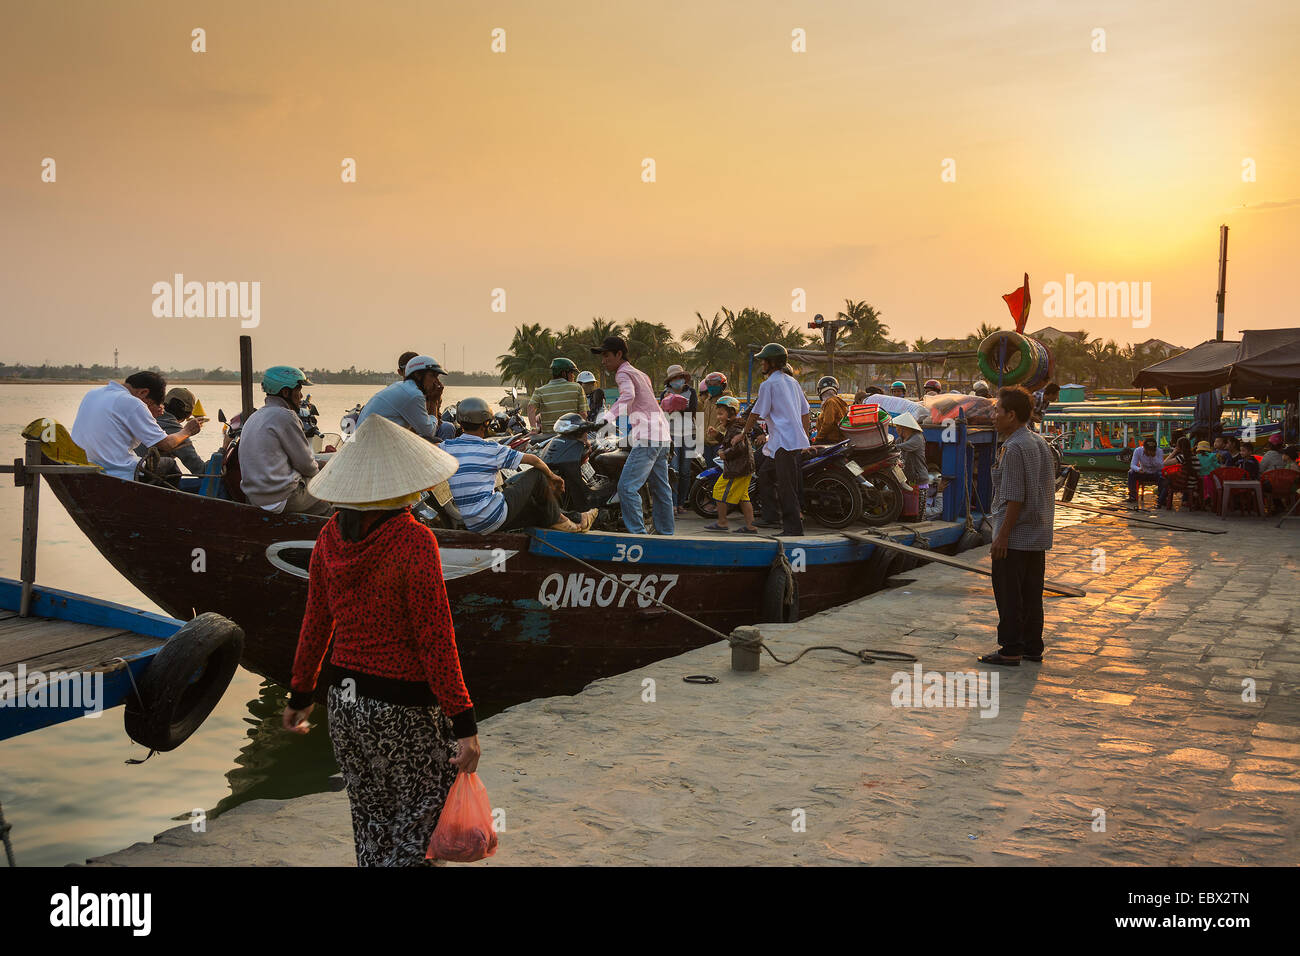 Workers returning home in Hoi An Vietnam at sunset Stock Photo